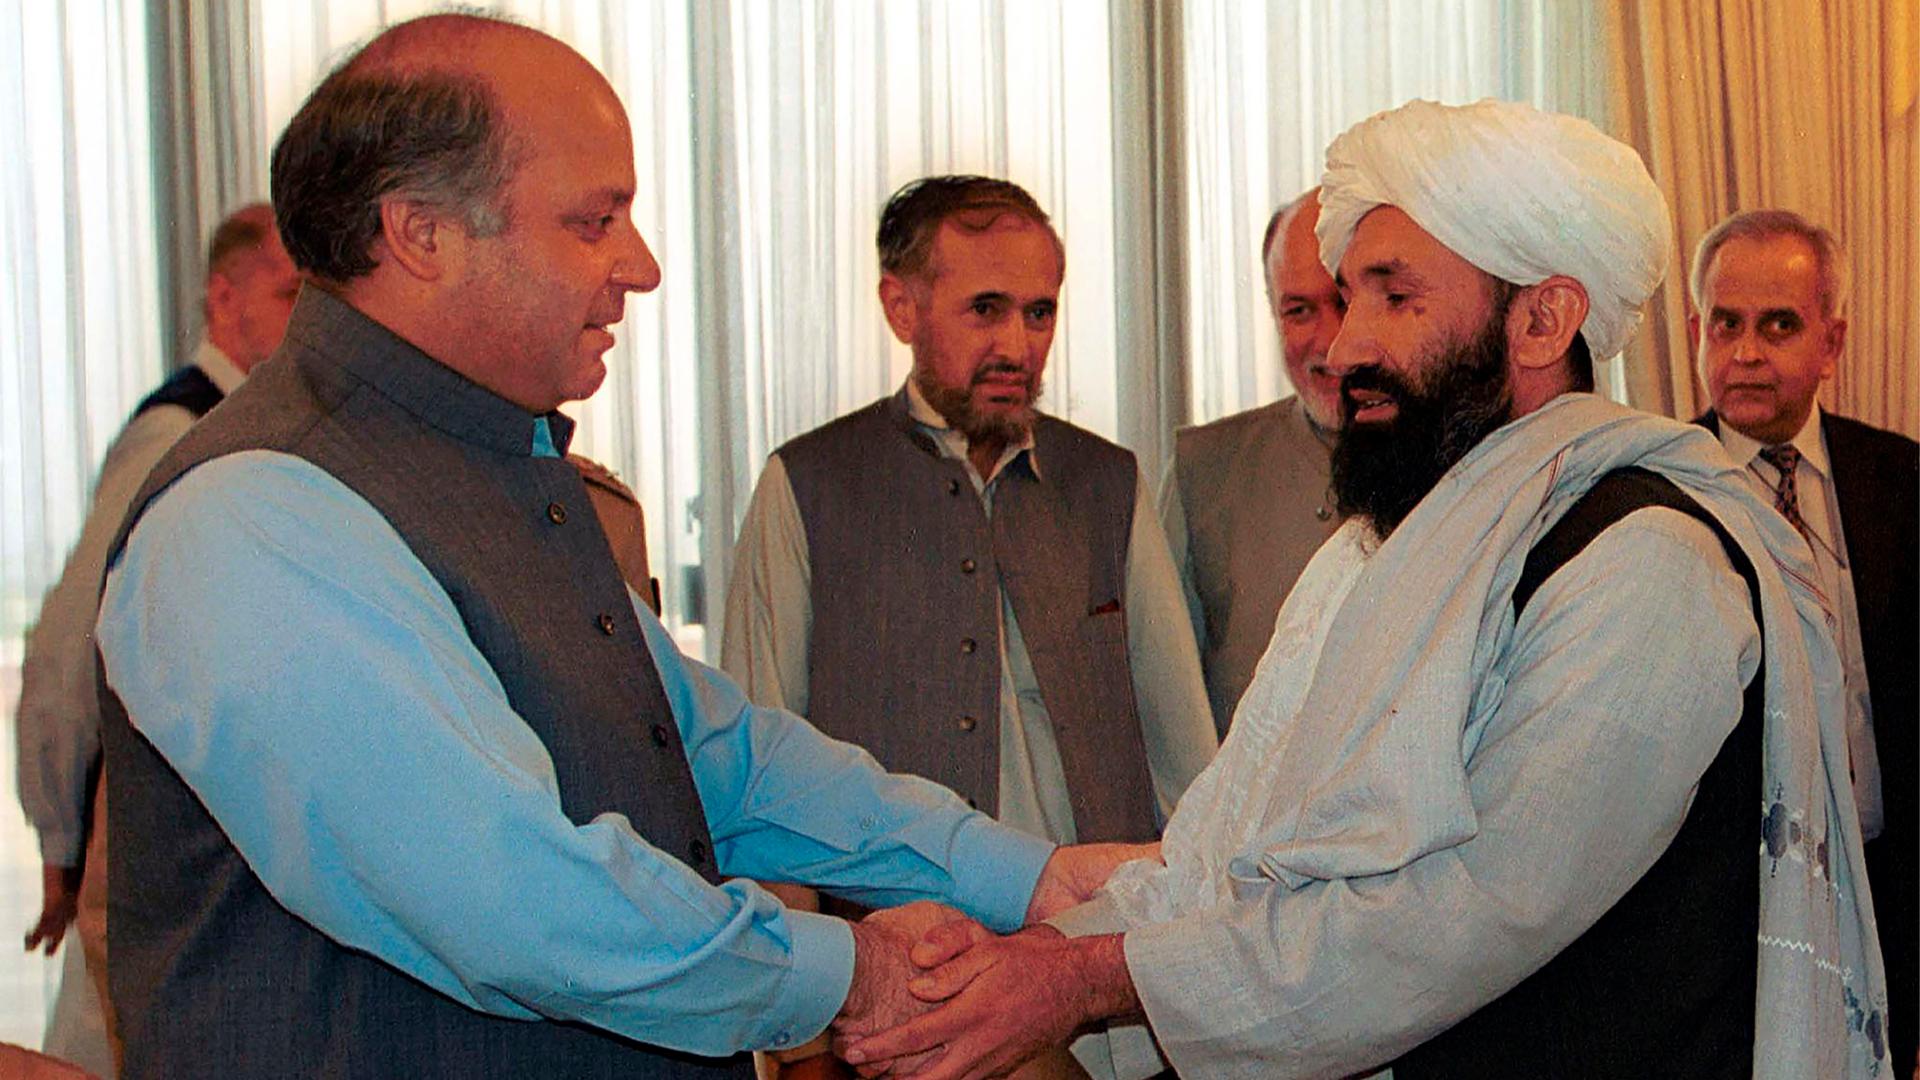 Mullah Hasan Akhund is shown wearing a white head wrap and standing across from Nawaz Sharif who is wearing a gray vest and blue shirt.